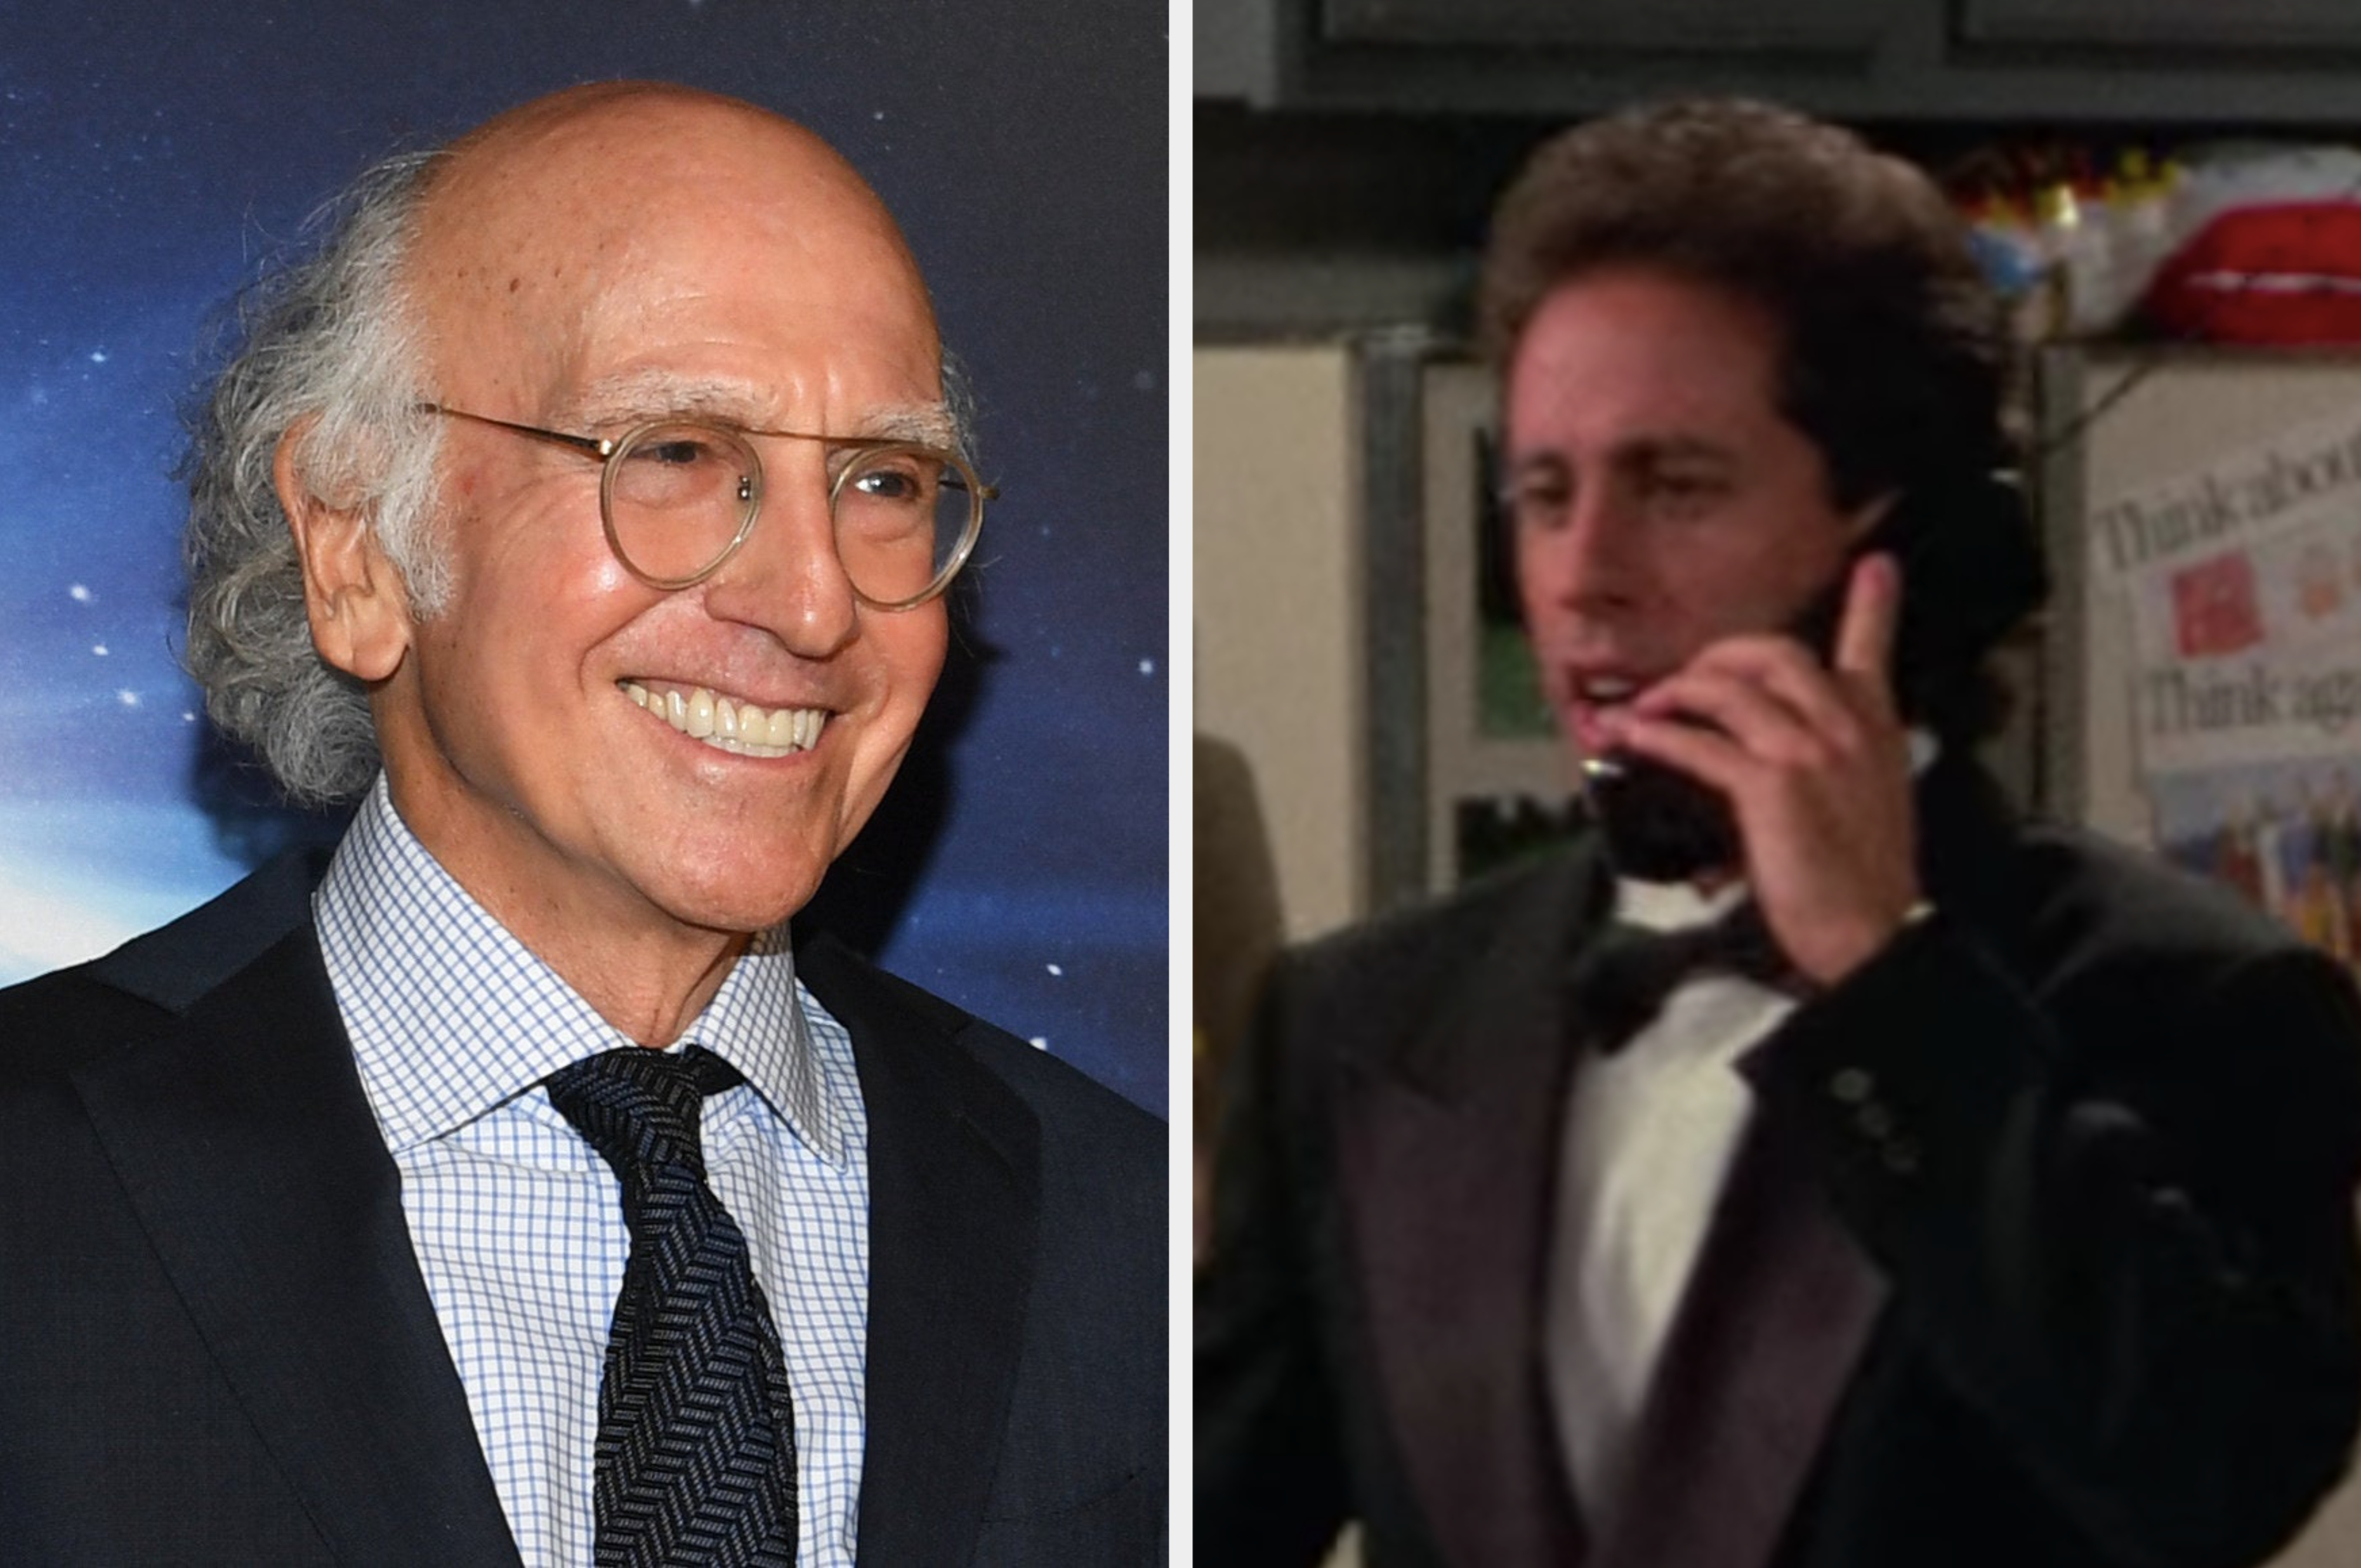 18 Larry David Moments That Made Him The Undisputed Master Of Seinfeld